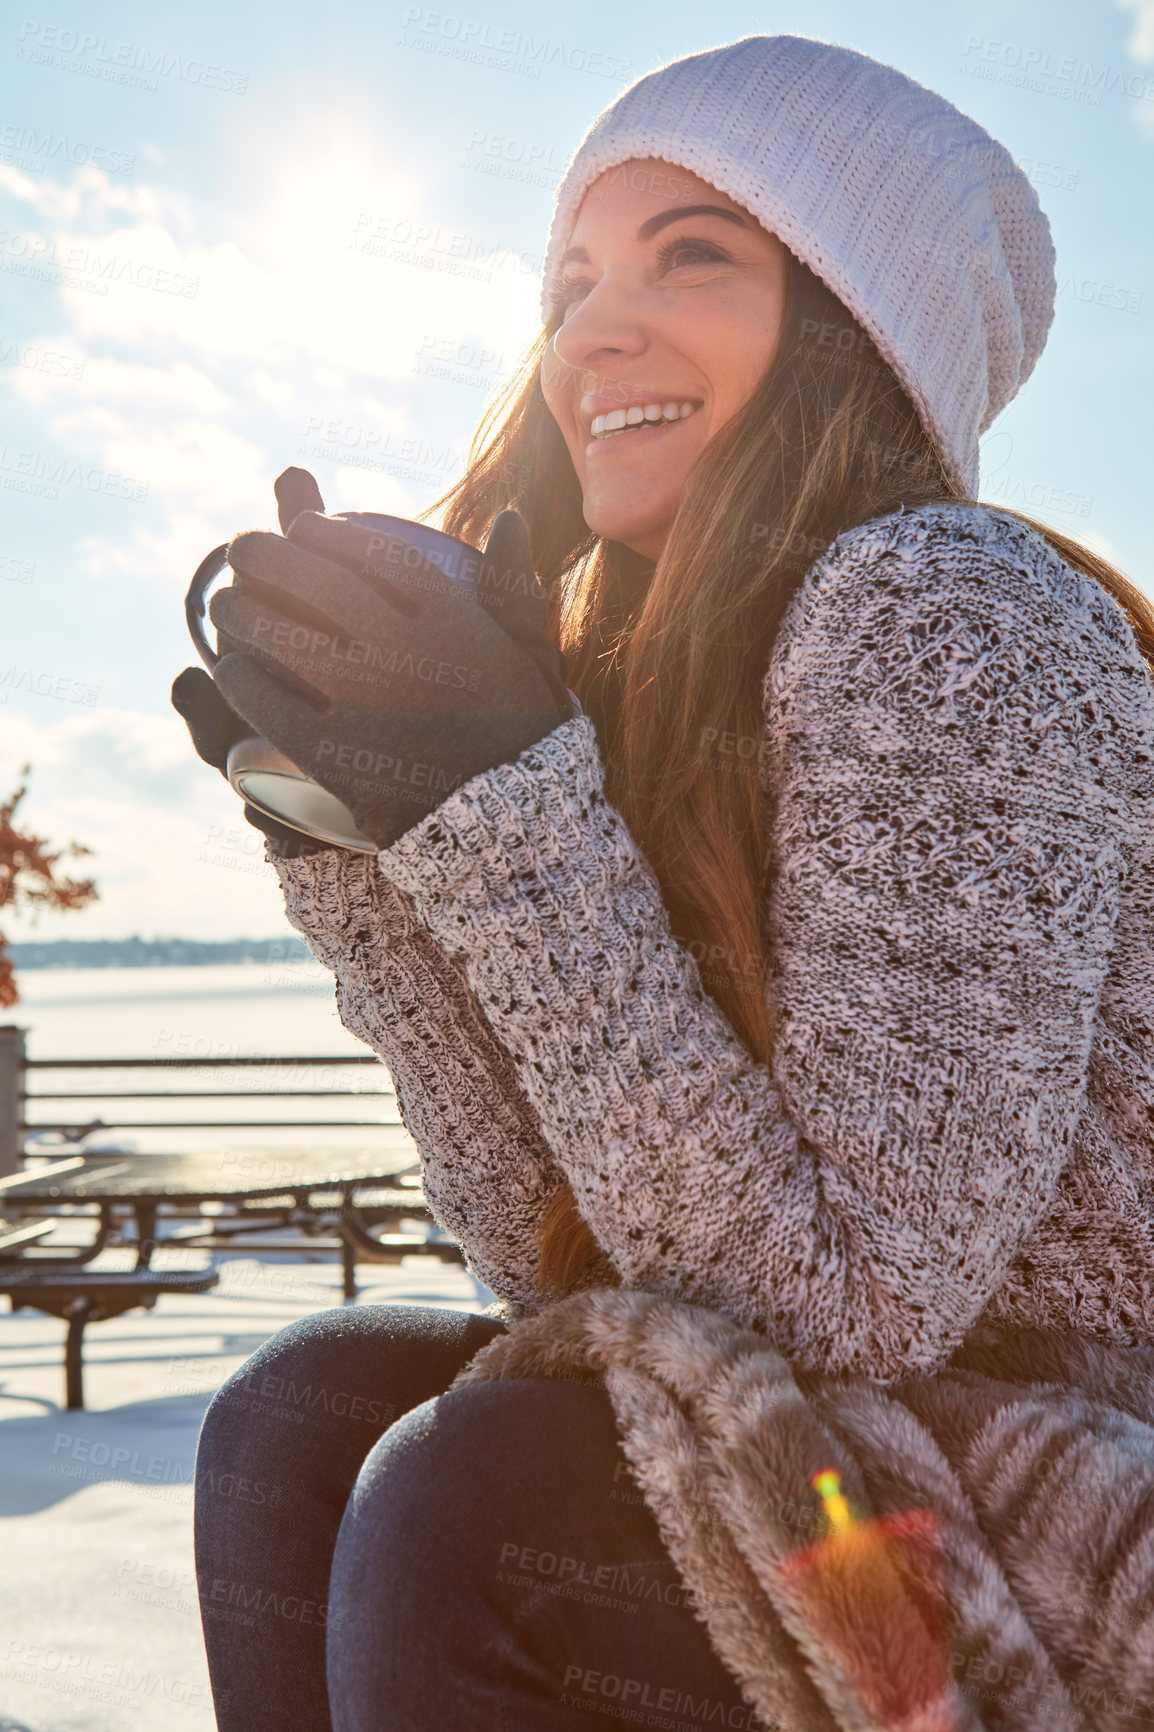 Buy stock photo Shot of a beautiful woman enjoying a hot beverage while sitting outside in the snow